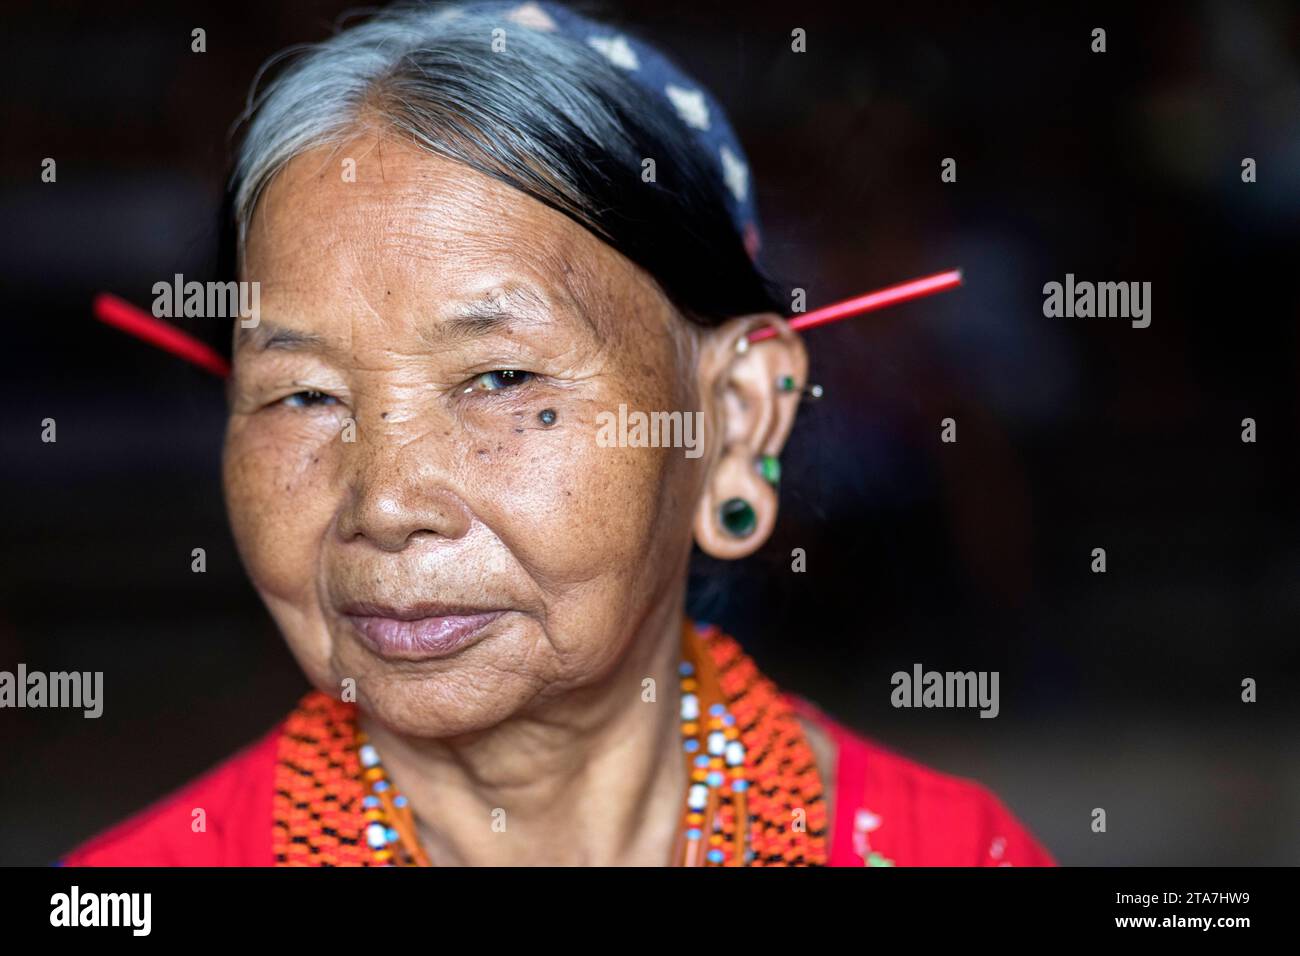 Local woman, a queen, kings wife from Konyak tribe from a remote village in the mountains in Nagaland, northeastern part of India, smilling, posing Stock Photo